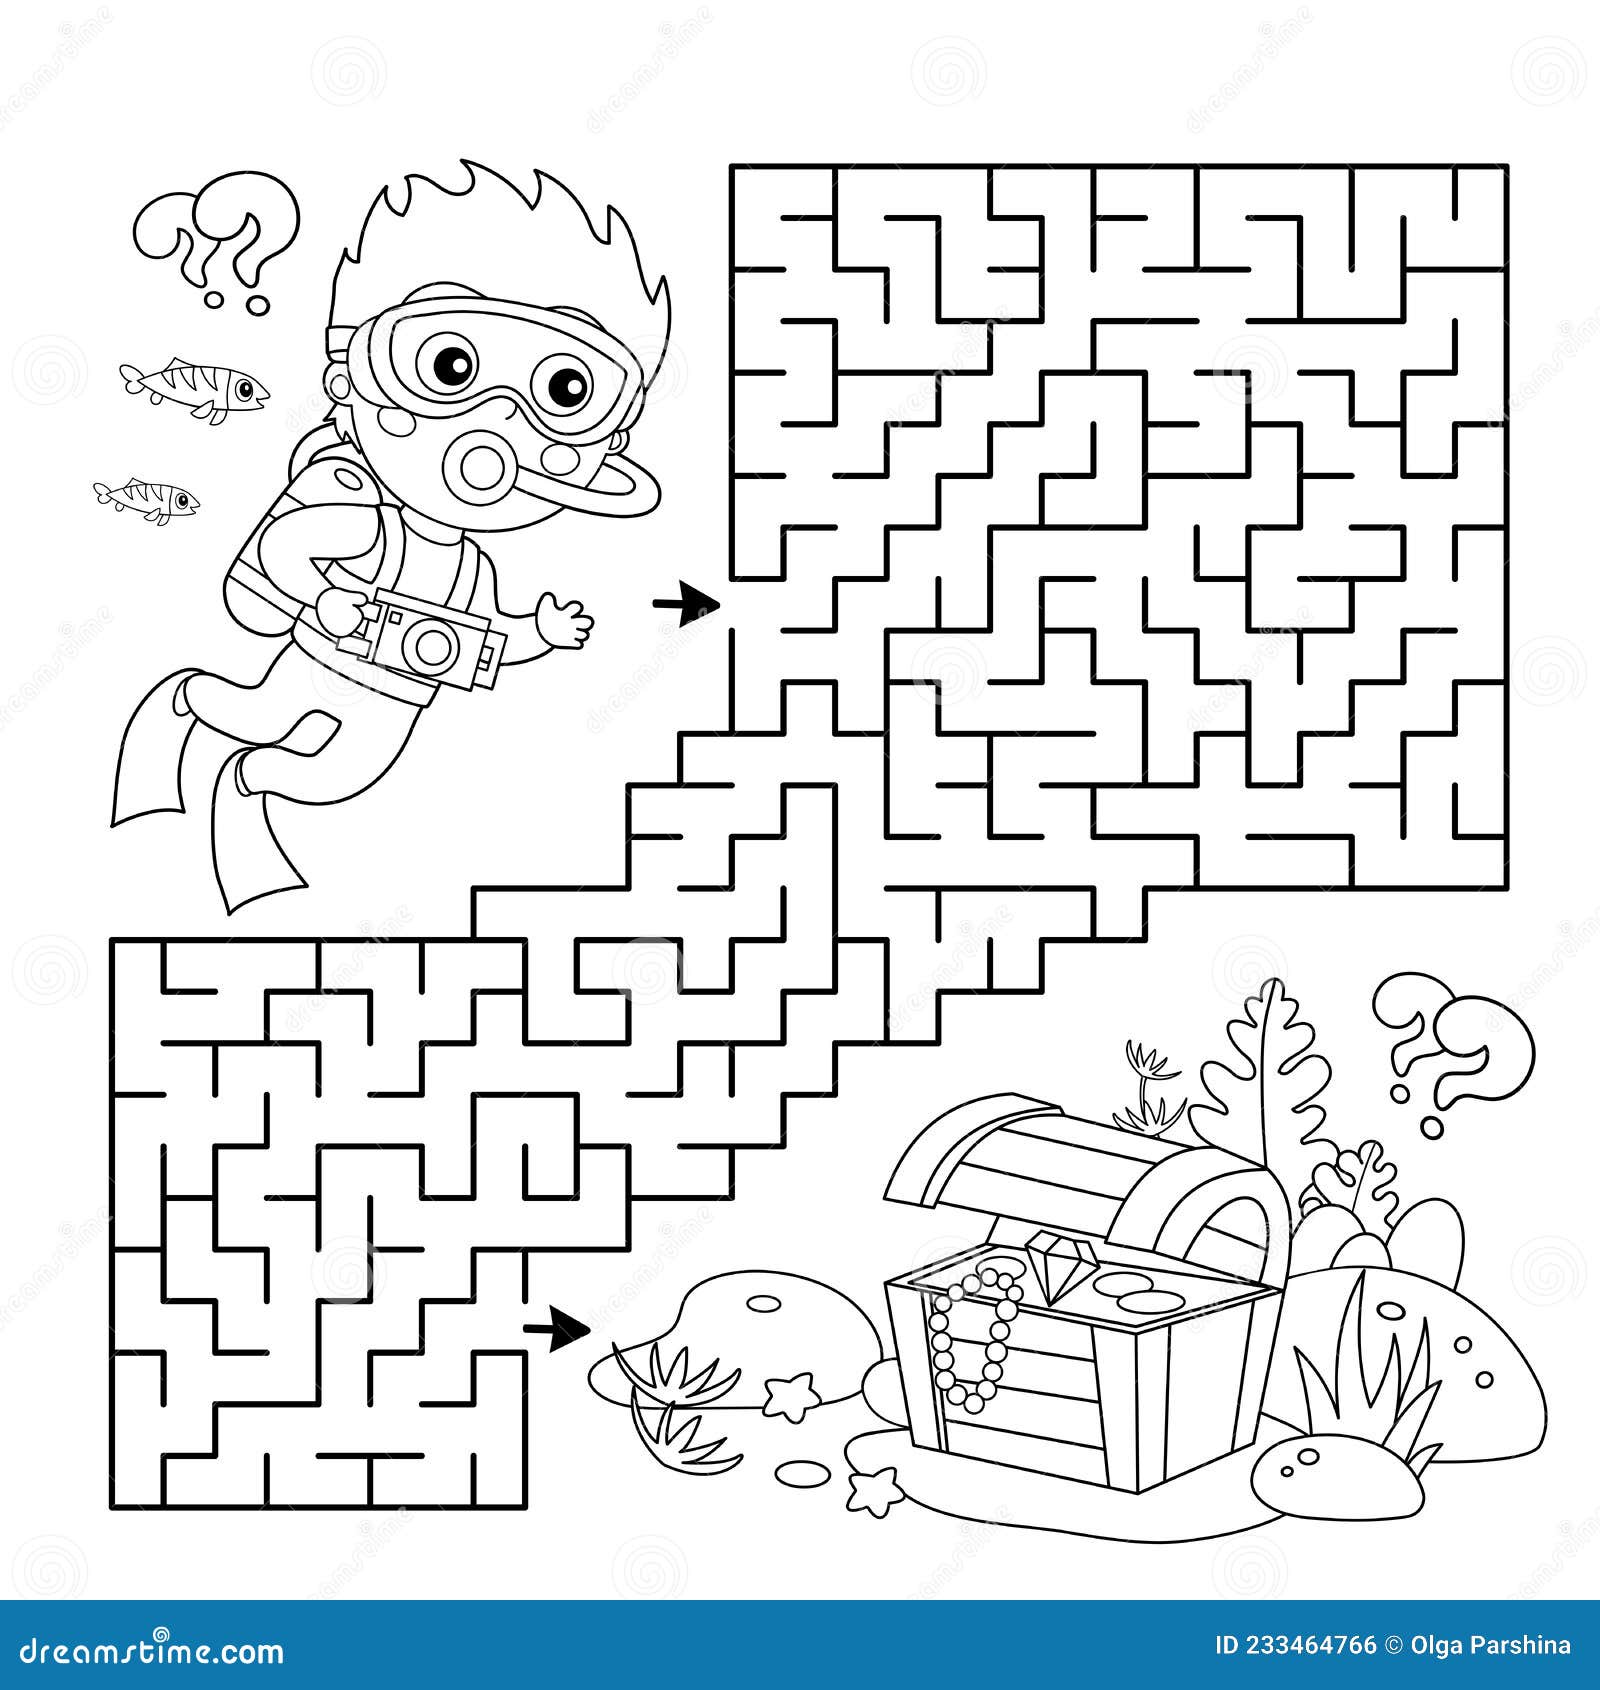 Maze or Labyrinth Game